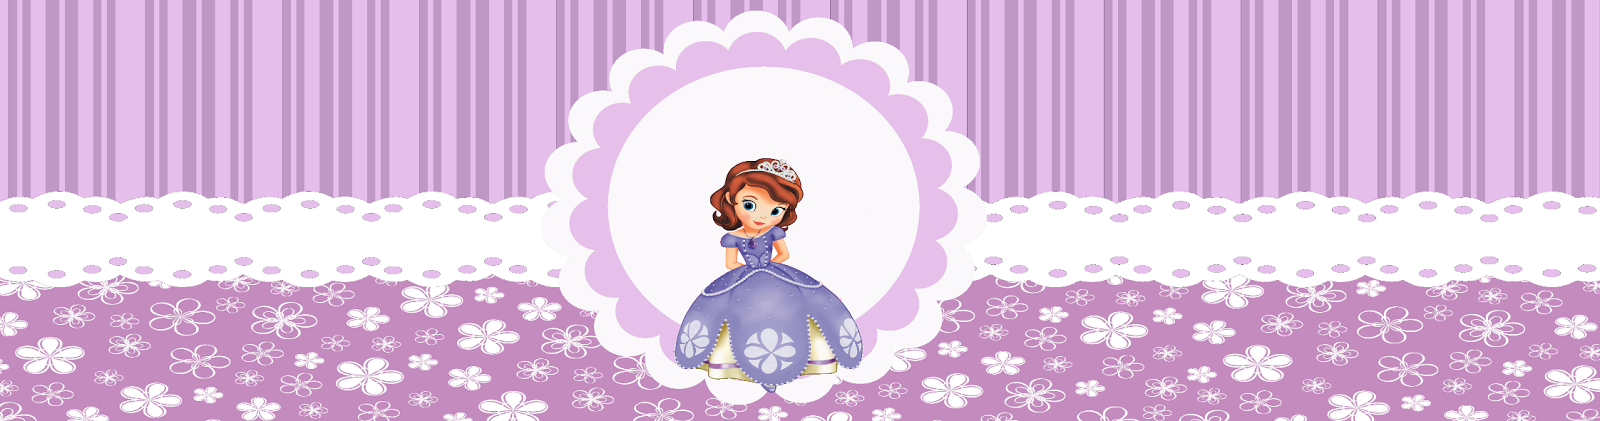 Download Sofia The First exploring the magical Garden of the Royal Palace  Wallpaper | Wallpapers.com